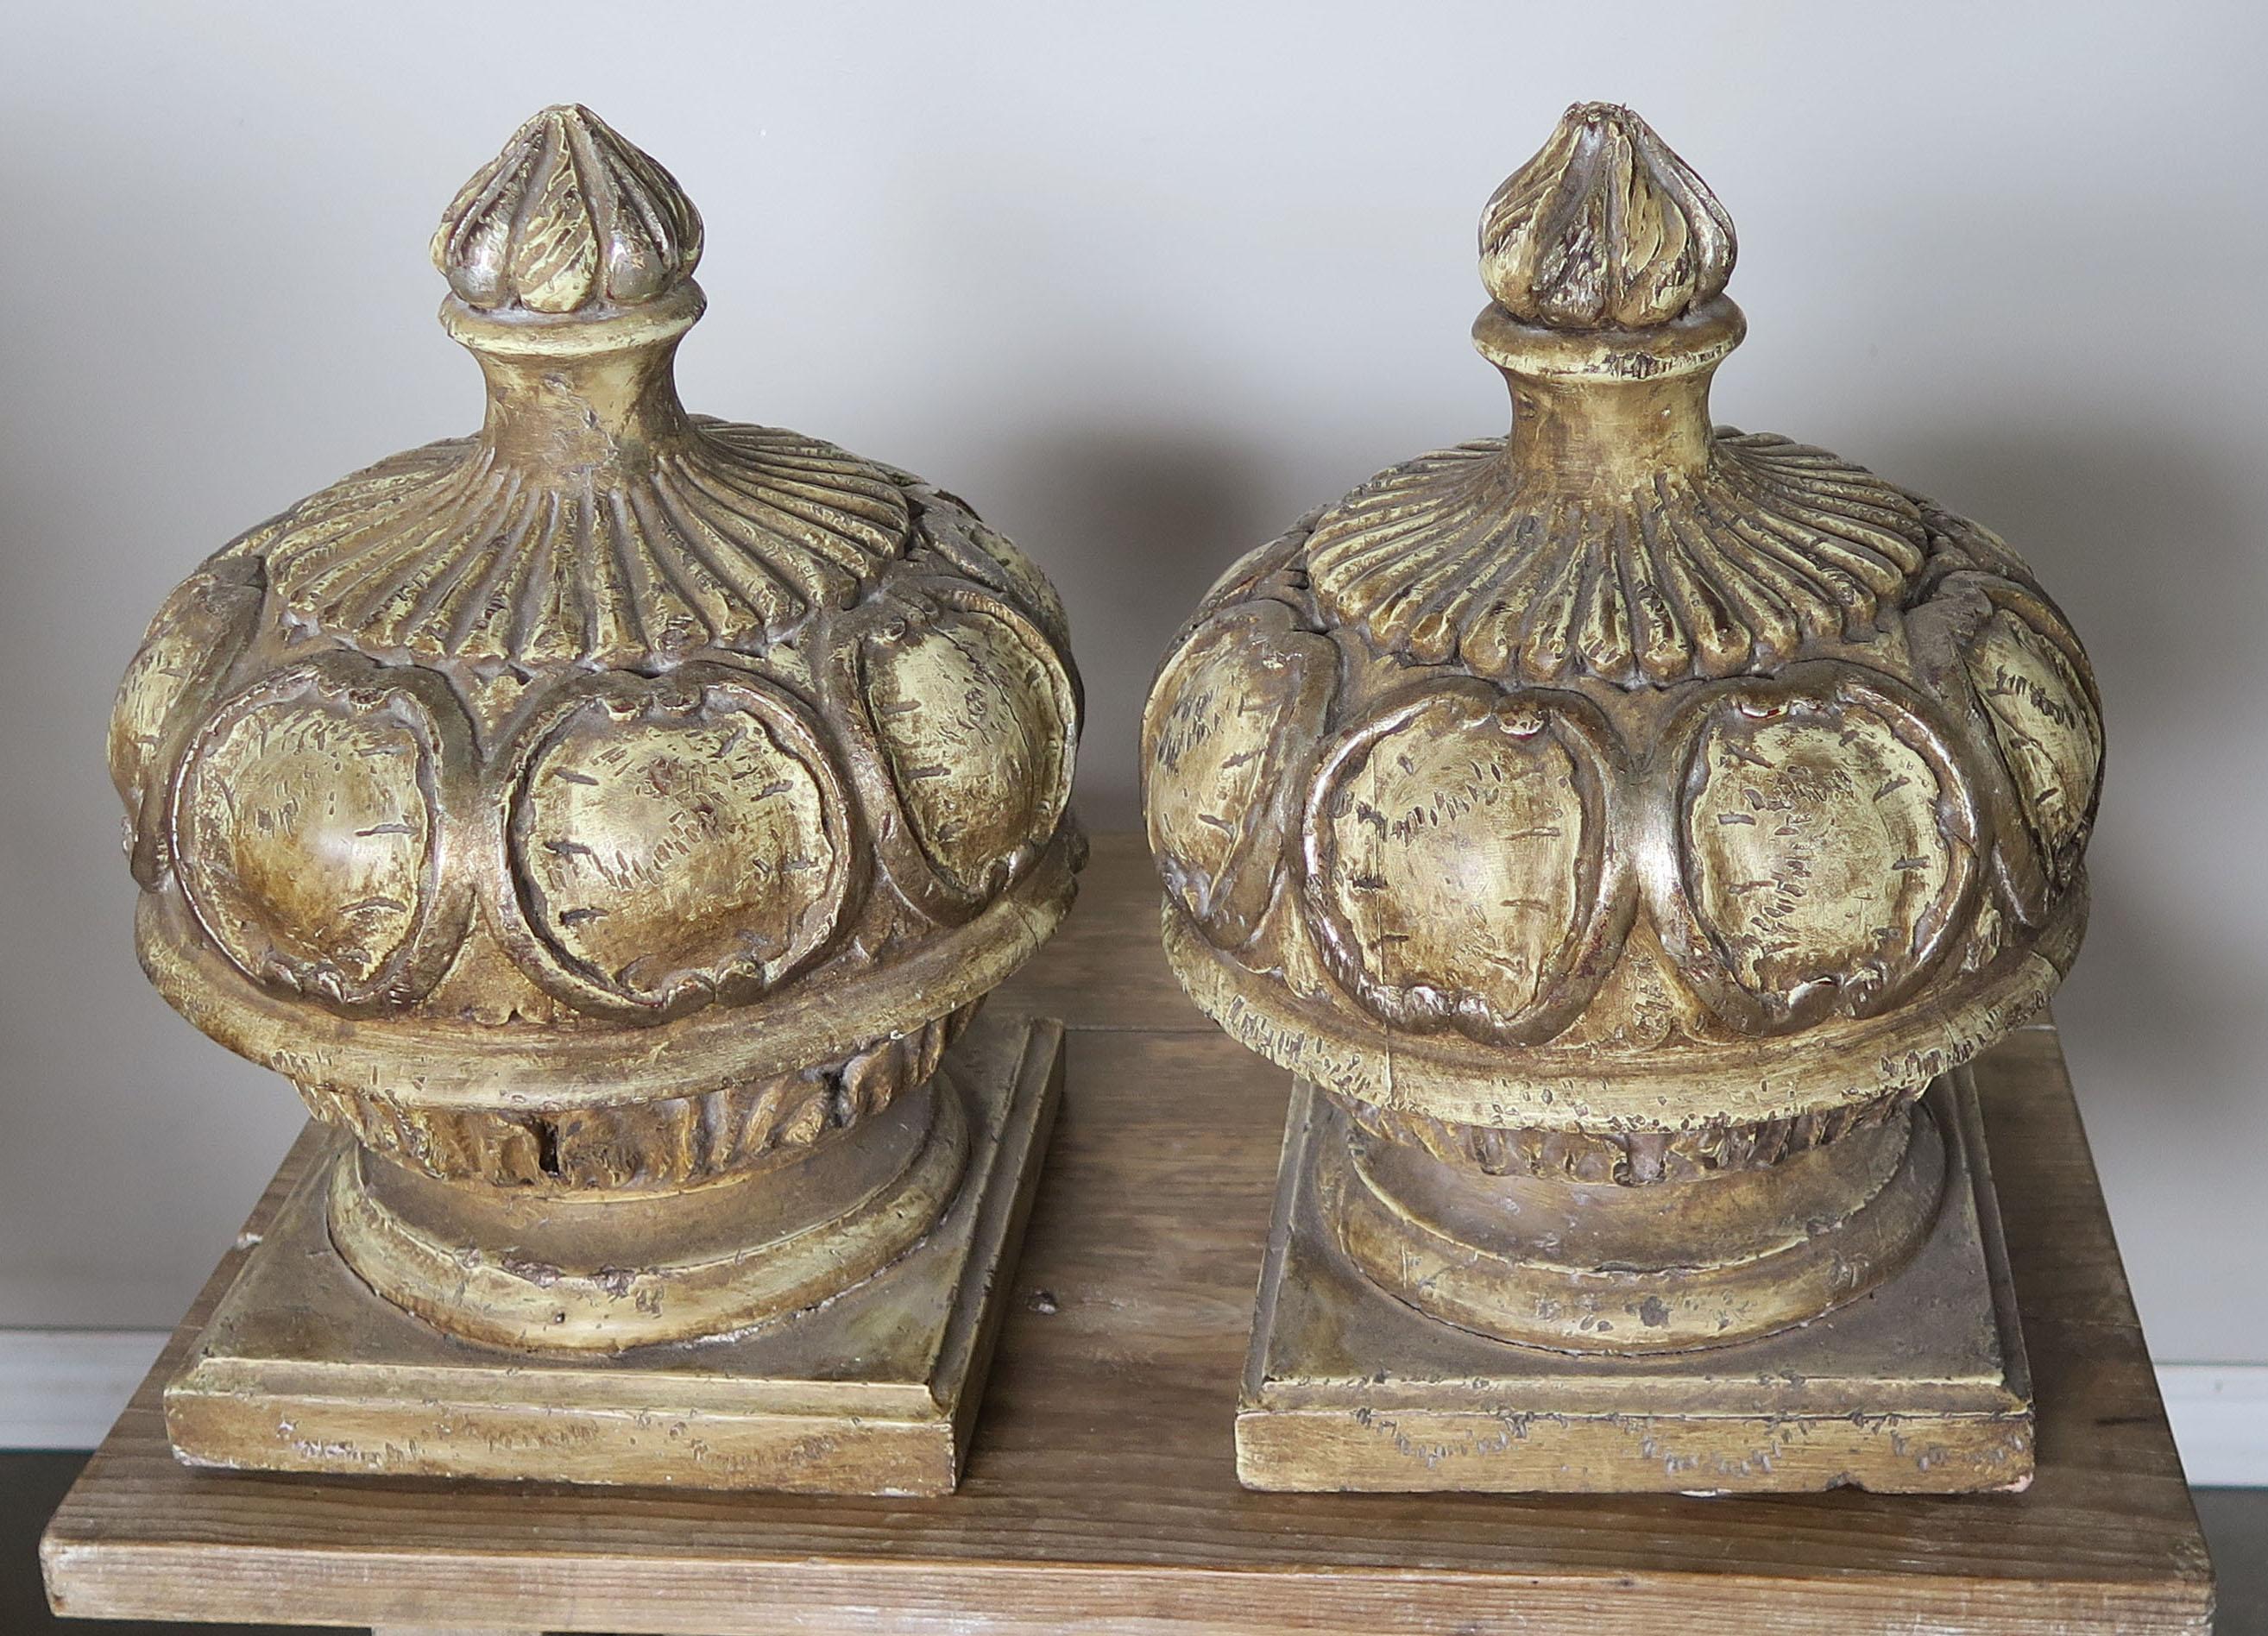 Pair of carved wood Italian painted finials with flame tops. Worn distressed paint.